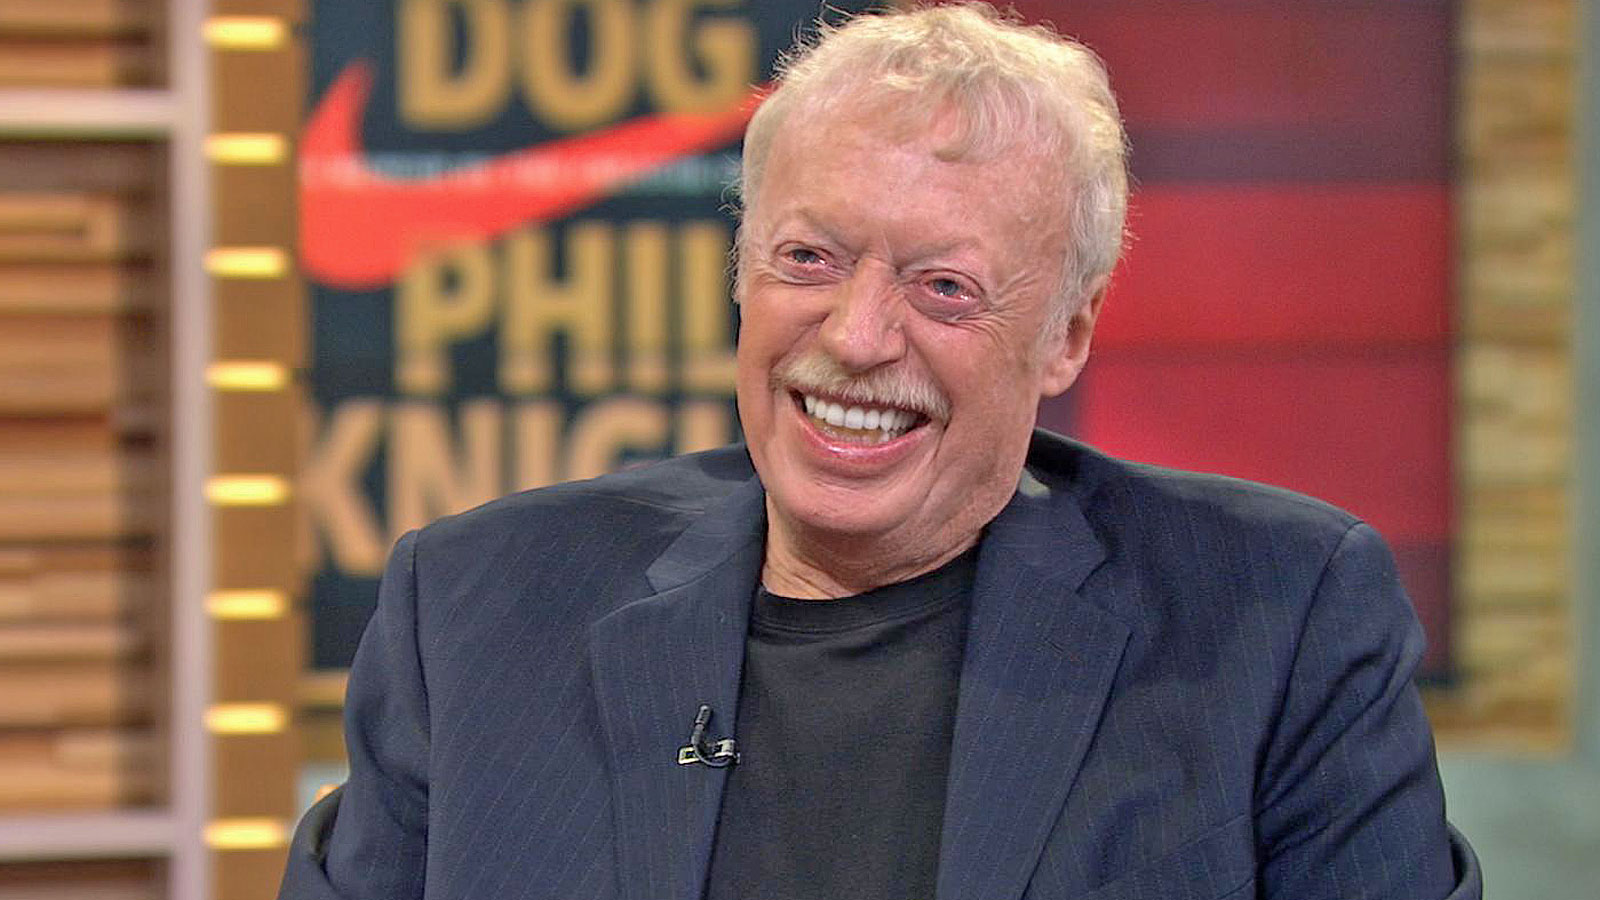 Phil Knight Videos at ABC News Video Archive at